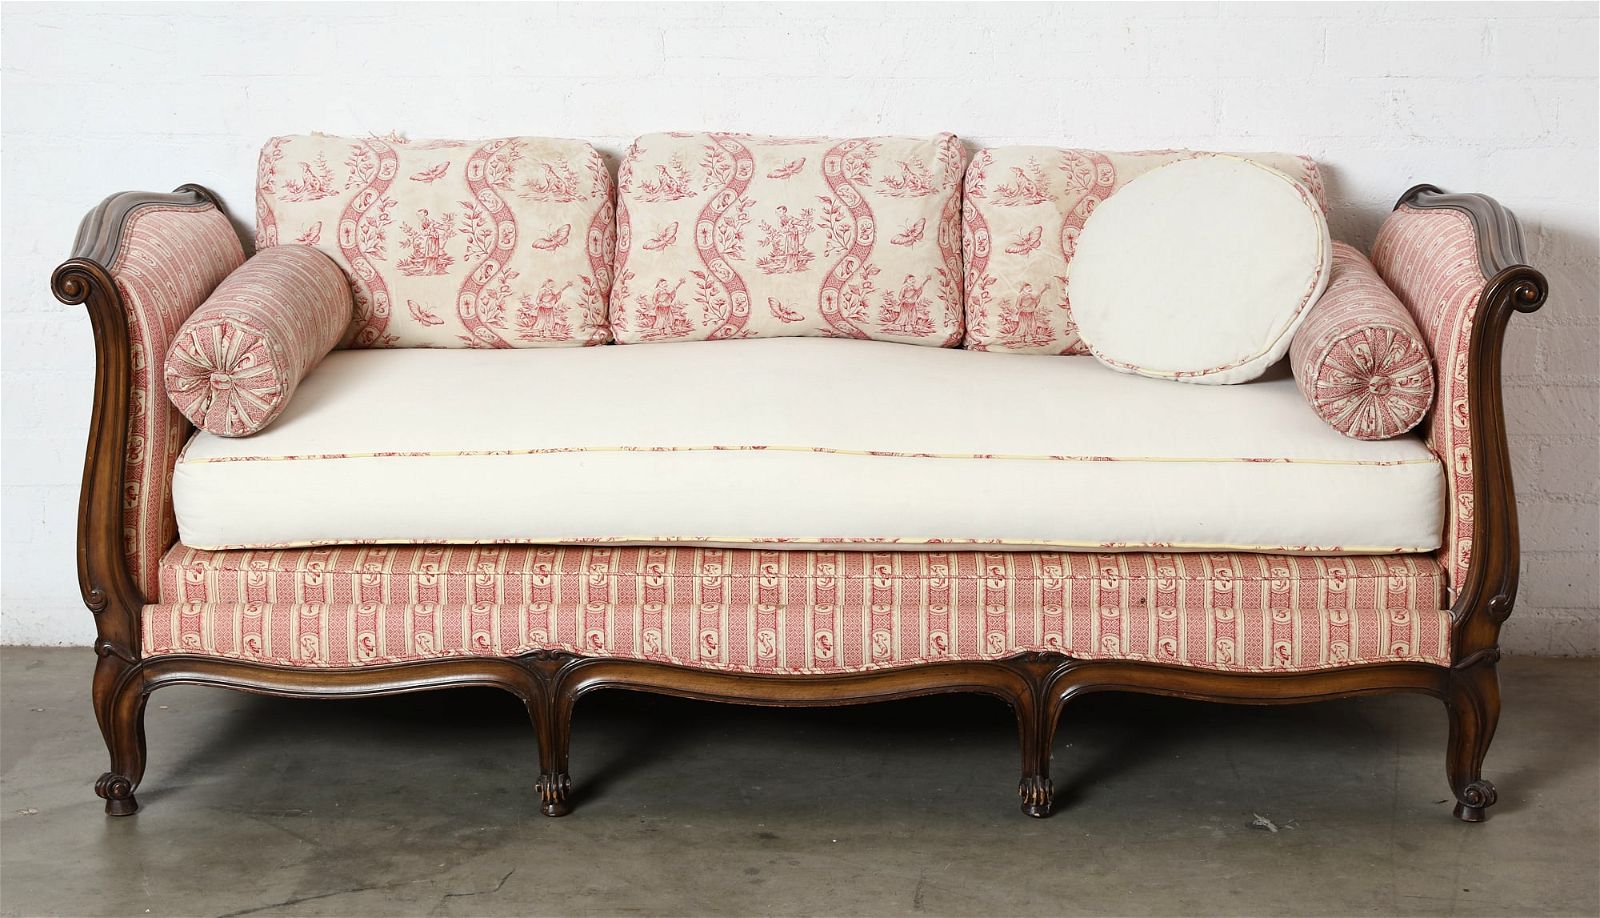 A LOUIS XV STYLE BEECHWOOD DAYBEDA 2fb2dca